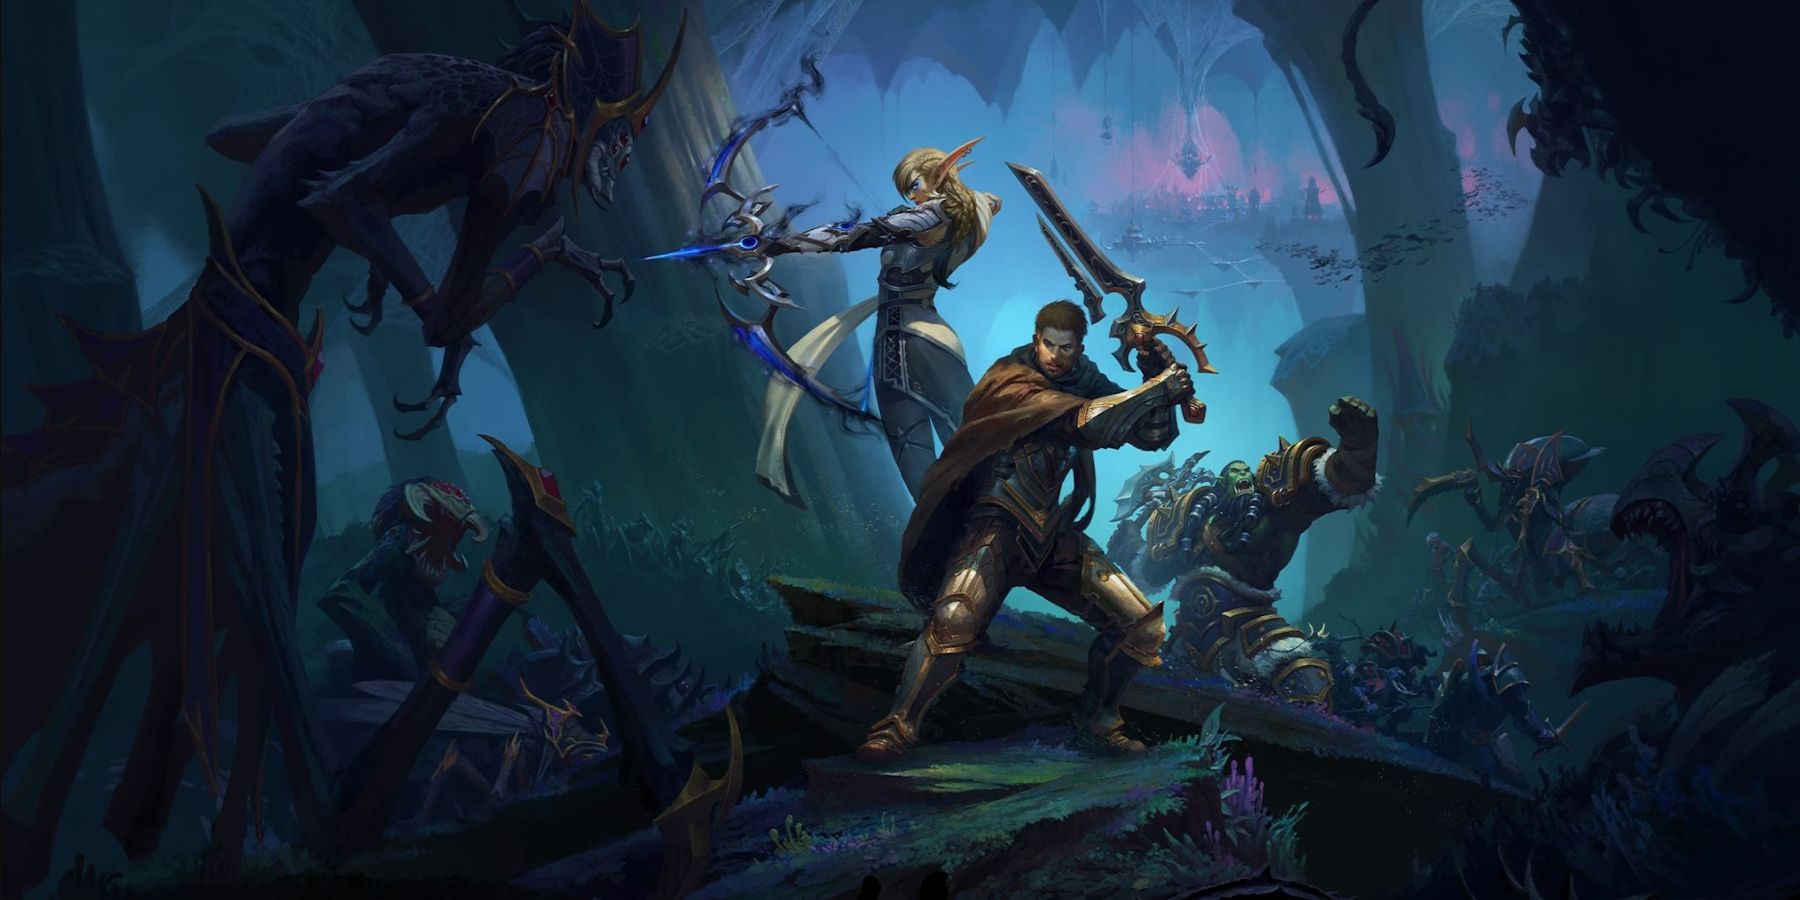 WoW: The War Within Expansion key artwork featuring Anduin, Thrall, and Alleria